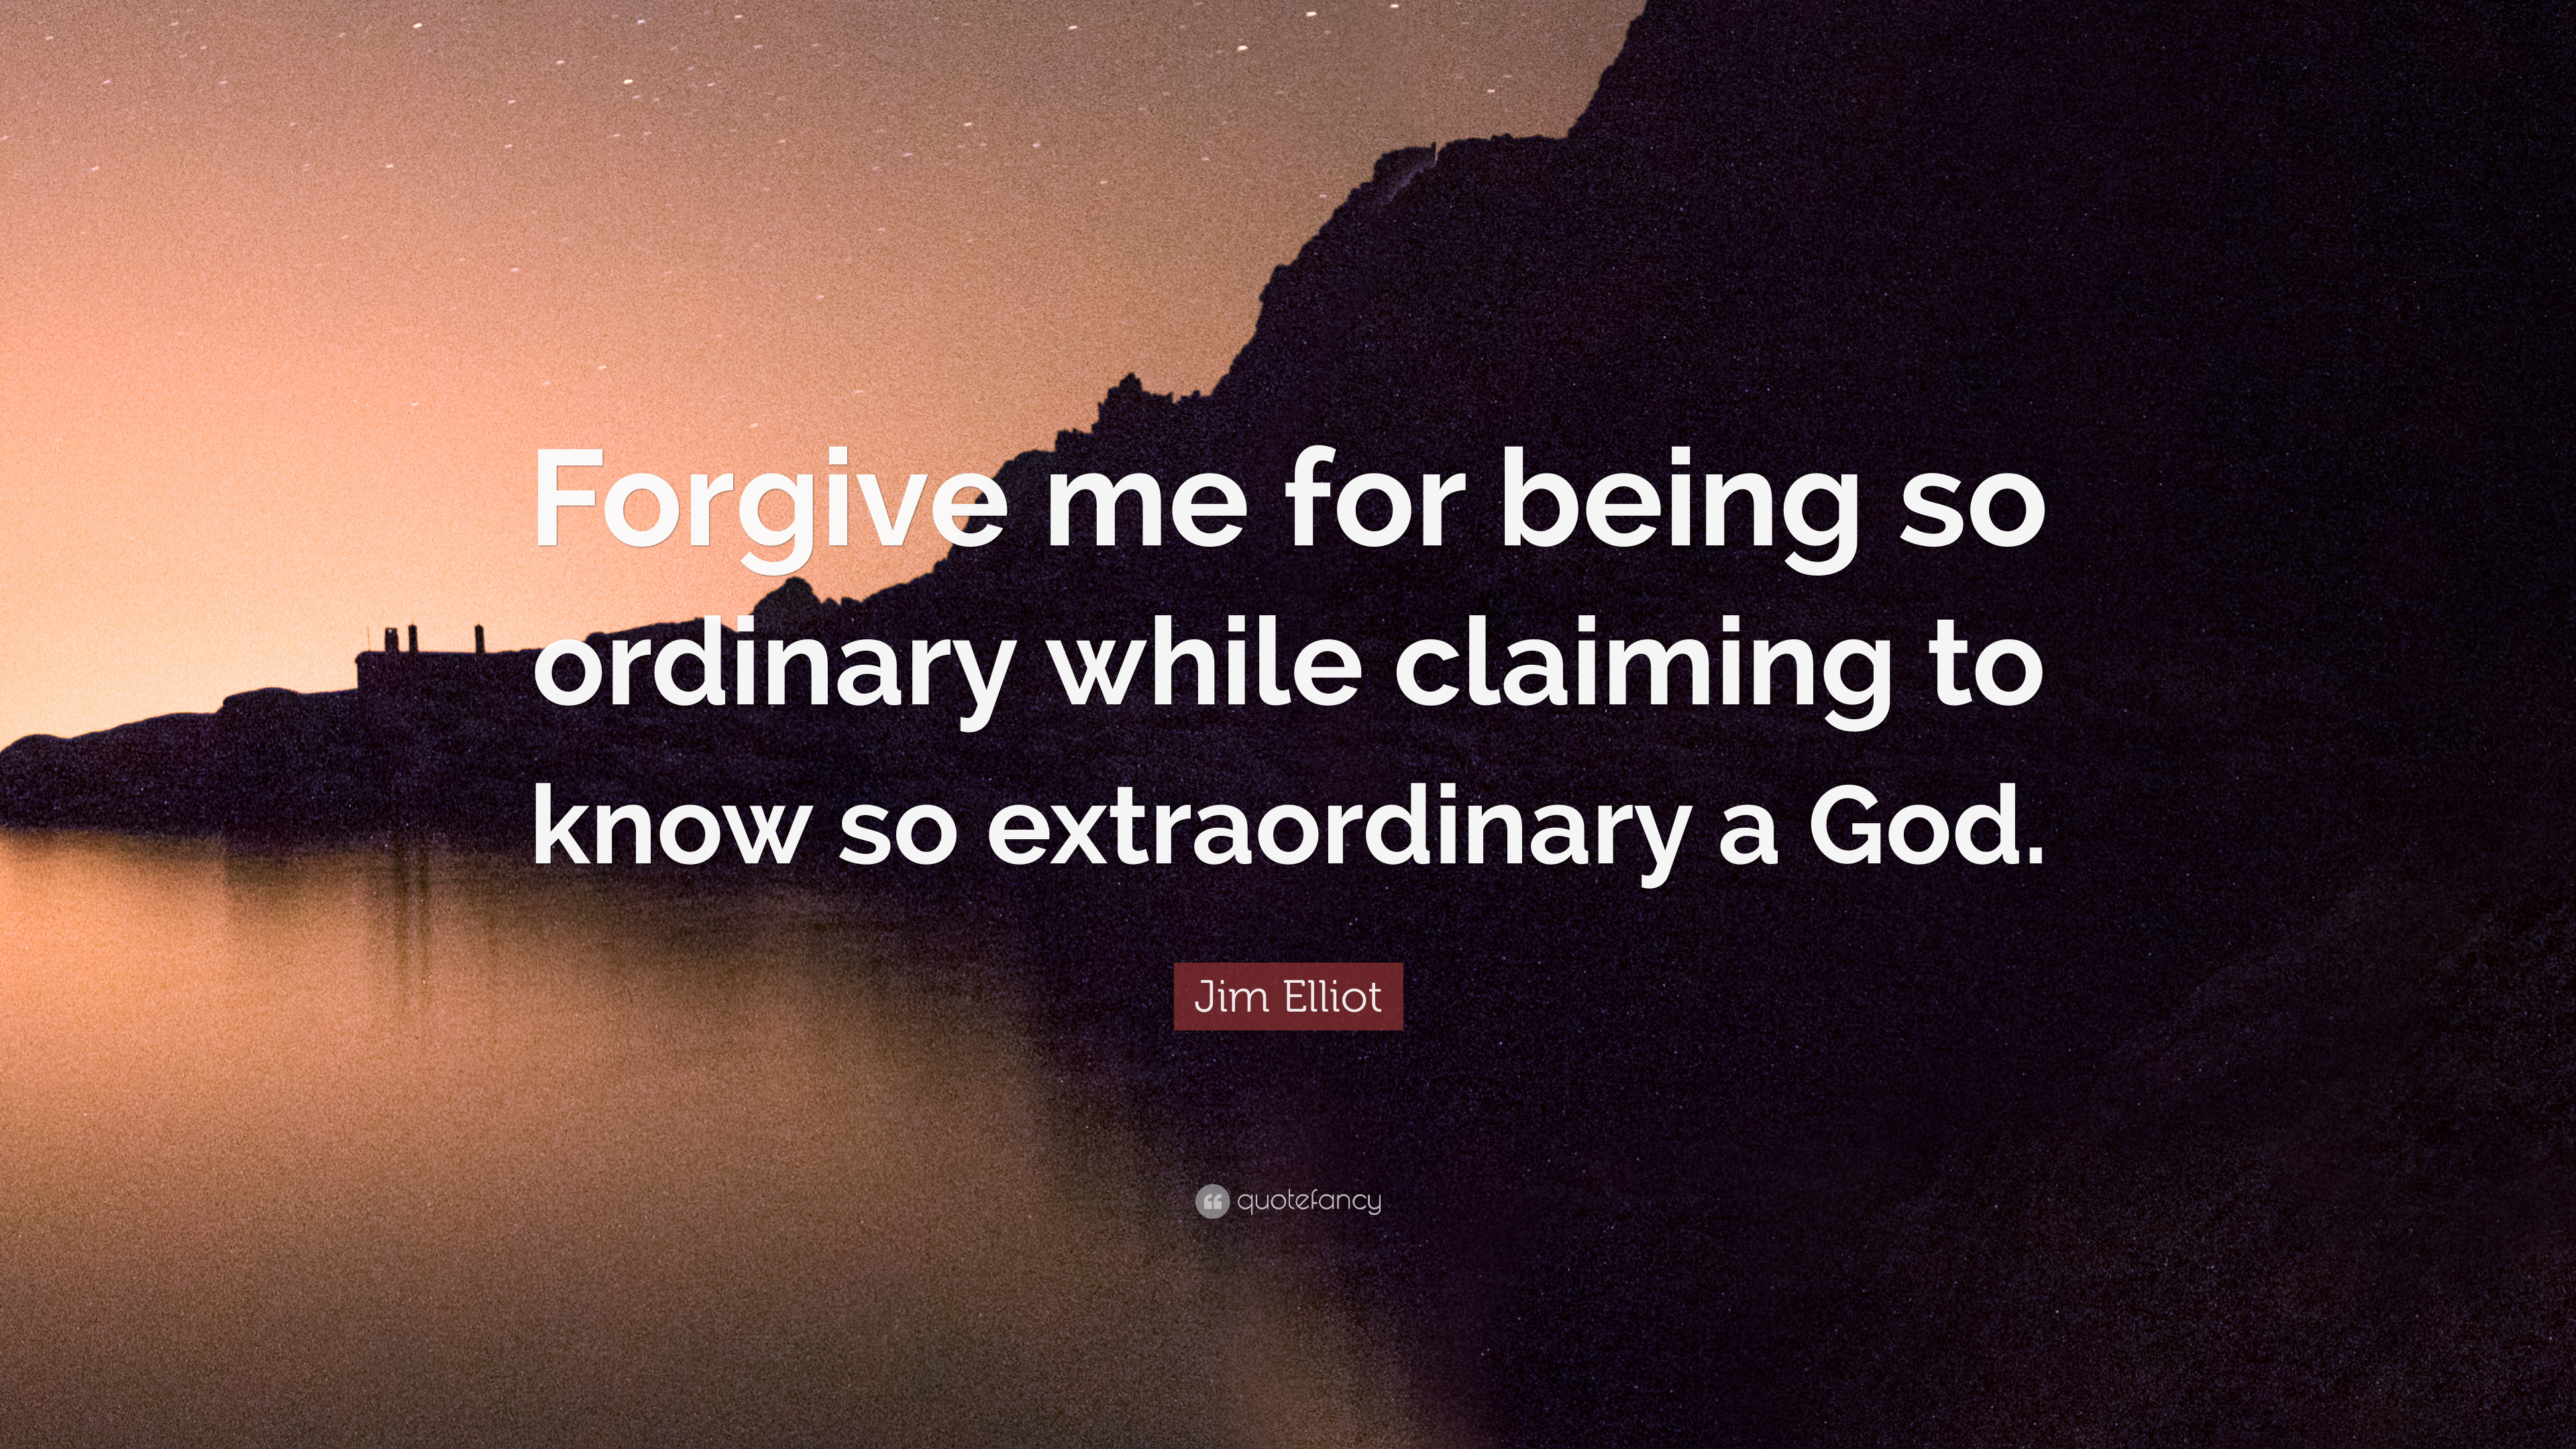 Jim Elliot Quote: “Forgive me for being so ordinary while claiming ...